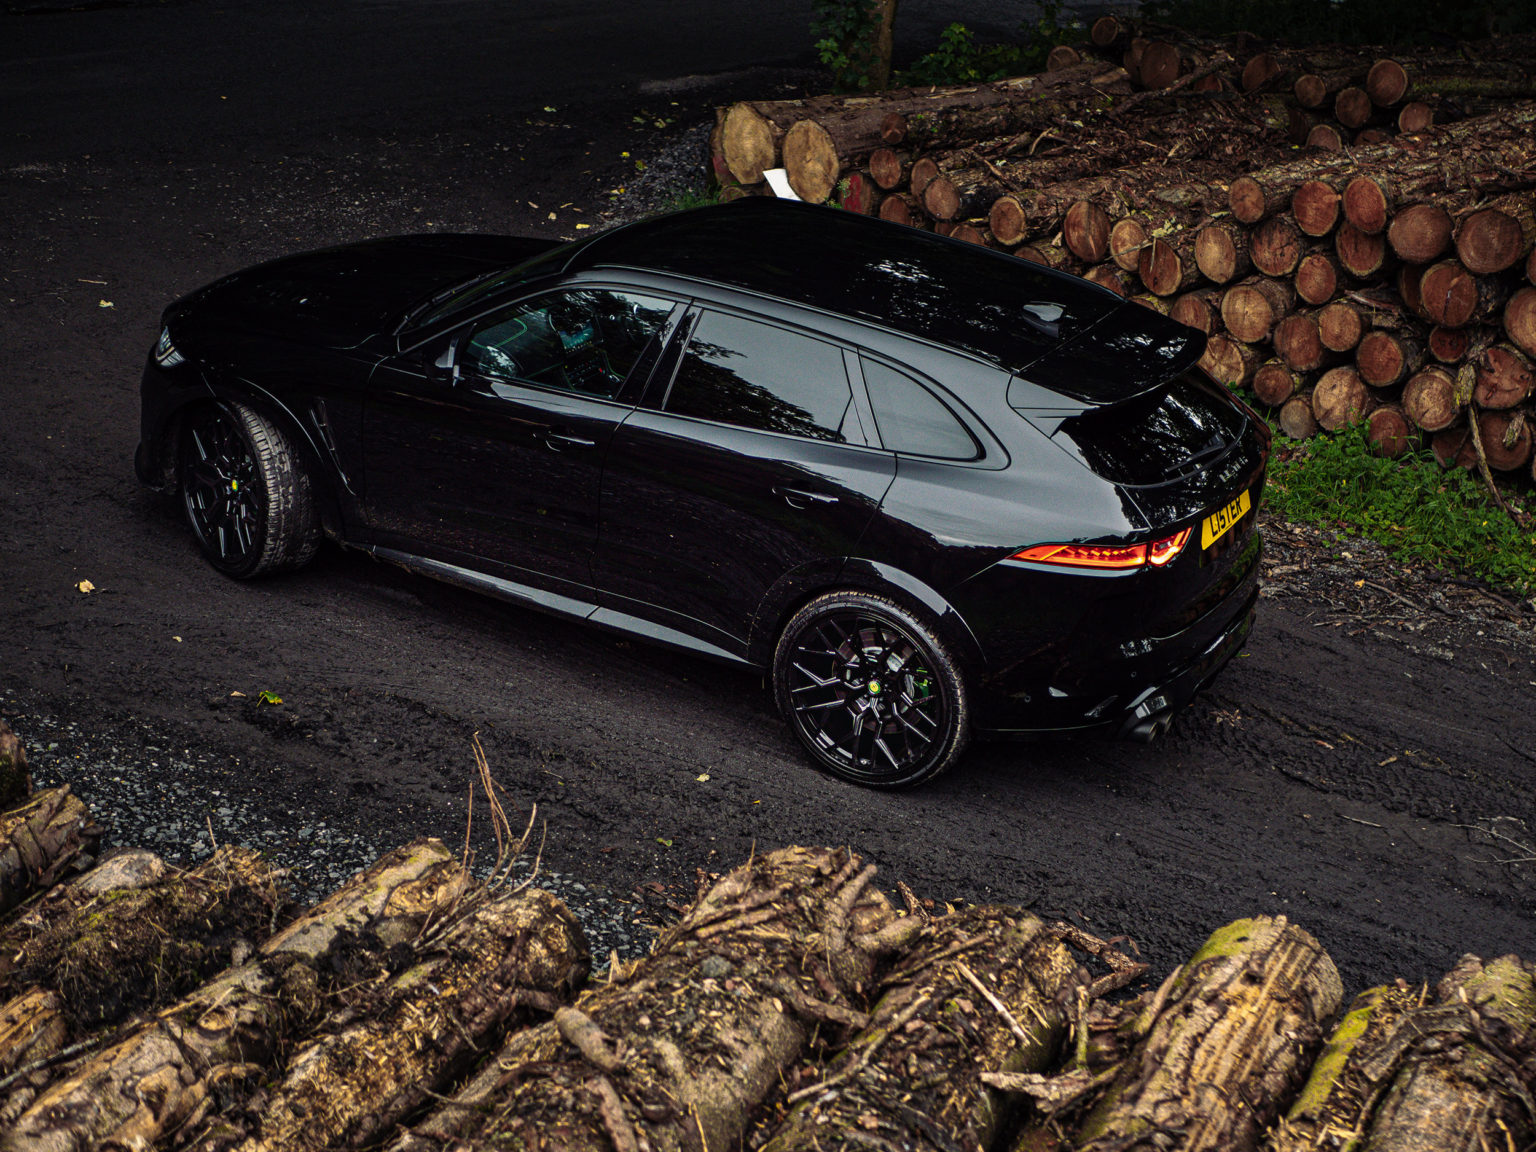 The 2020 Lister Stealth is based on the Jaguar F-Pace.